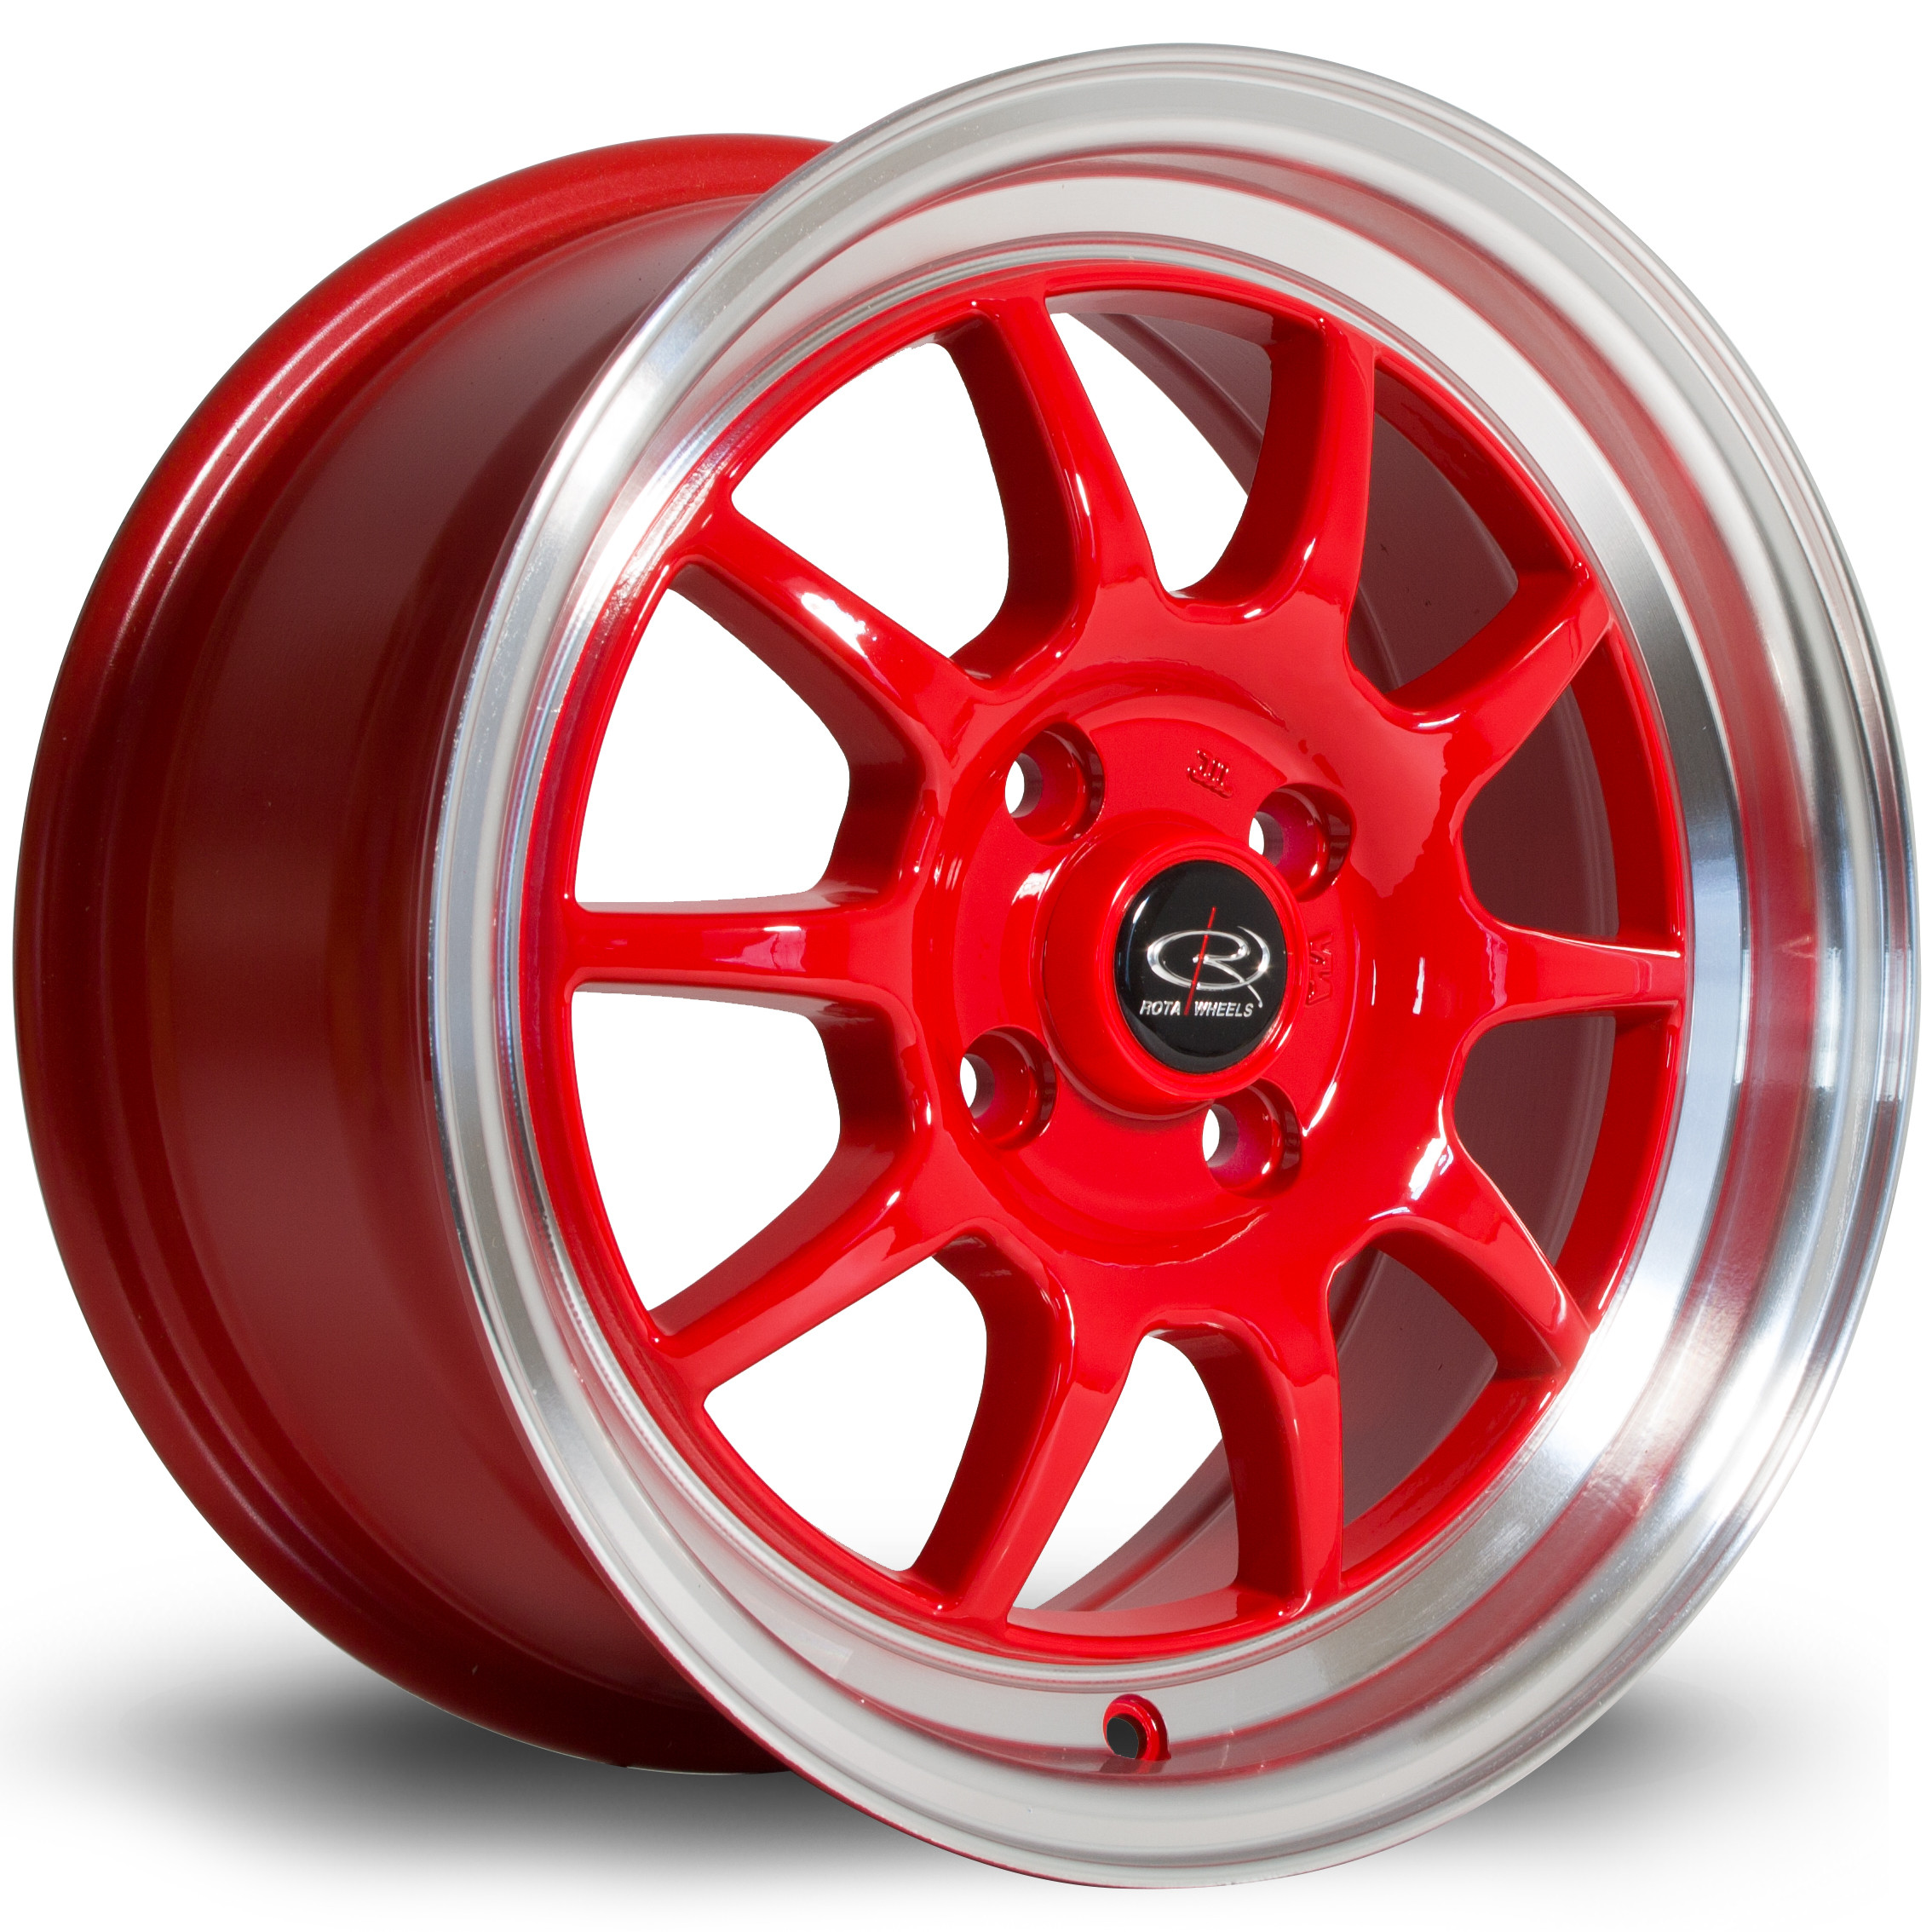 GT3 15x7 4x100 ET40 Red with Polished Lip - Tyre Size Calculator